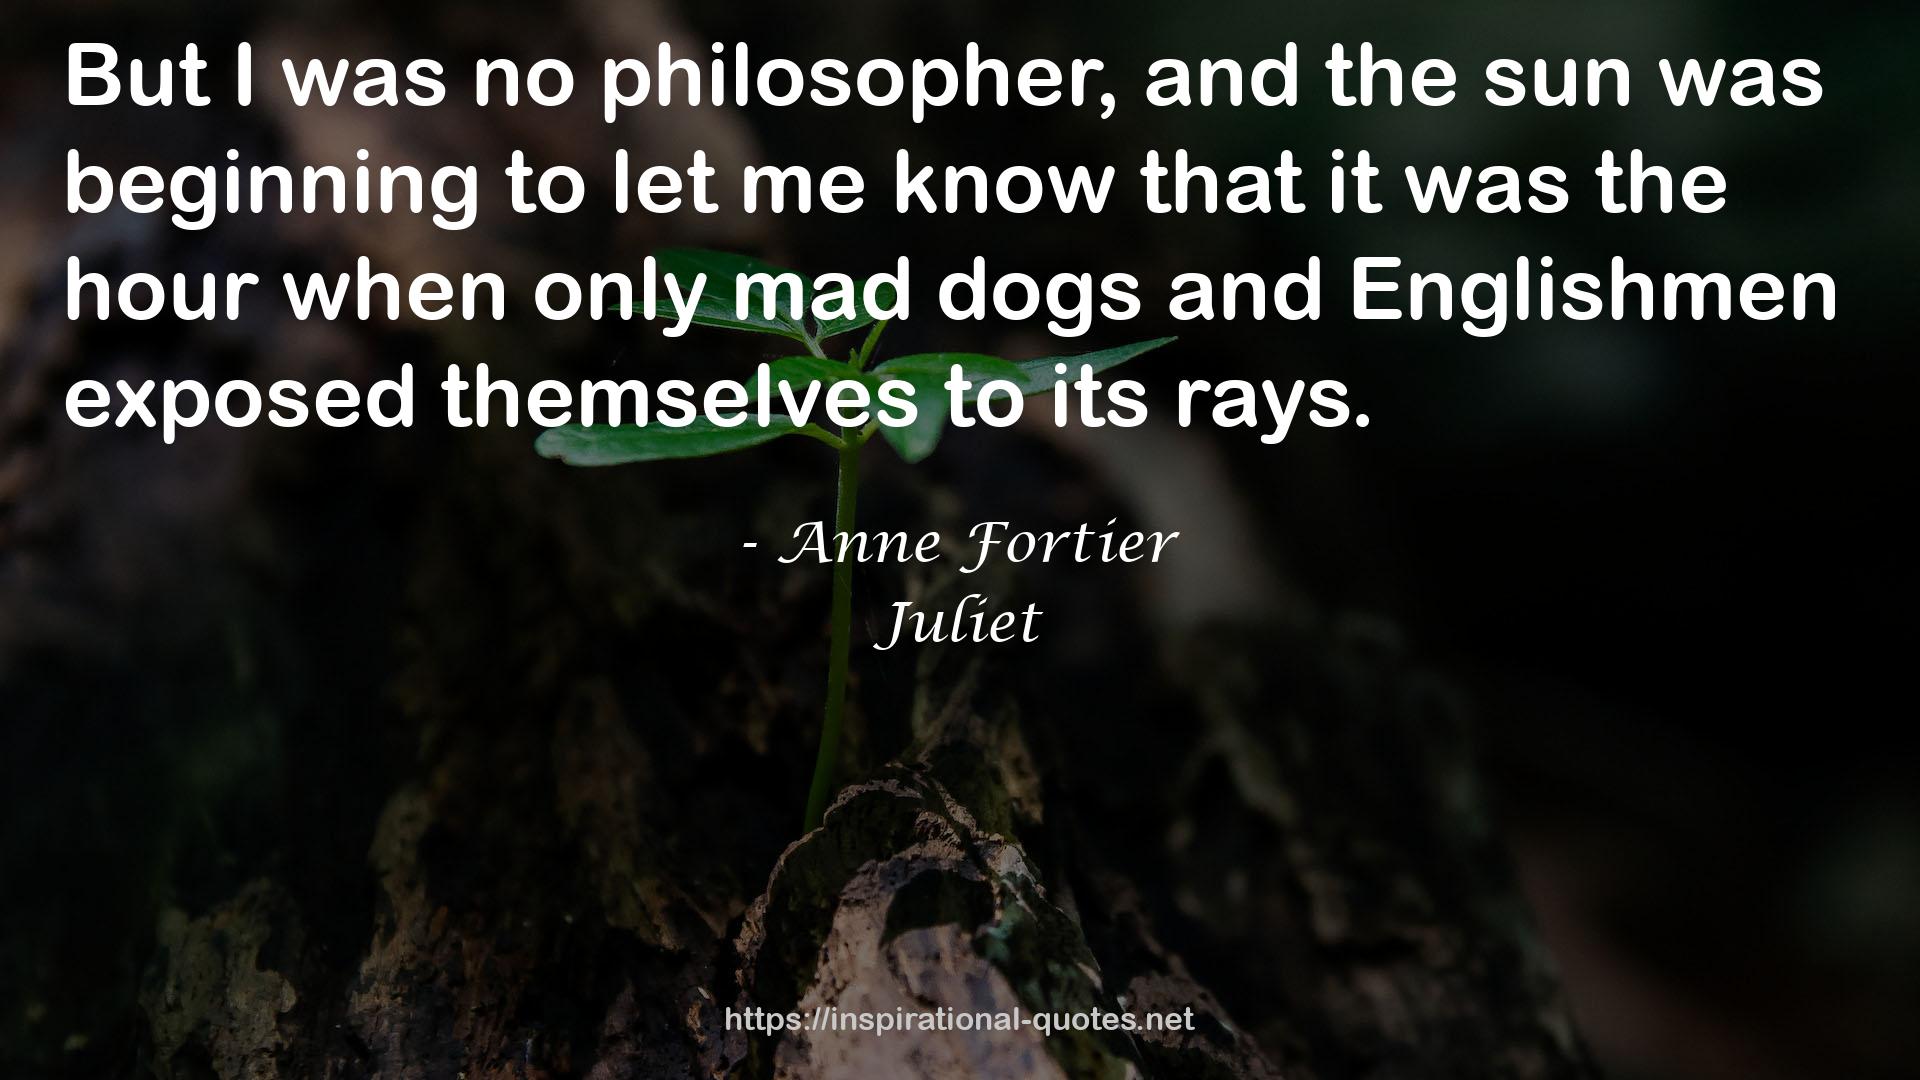 Anne Fortier QUOTES